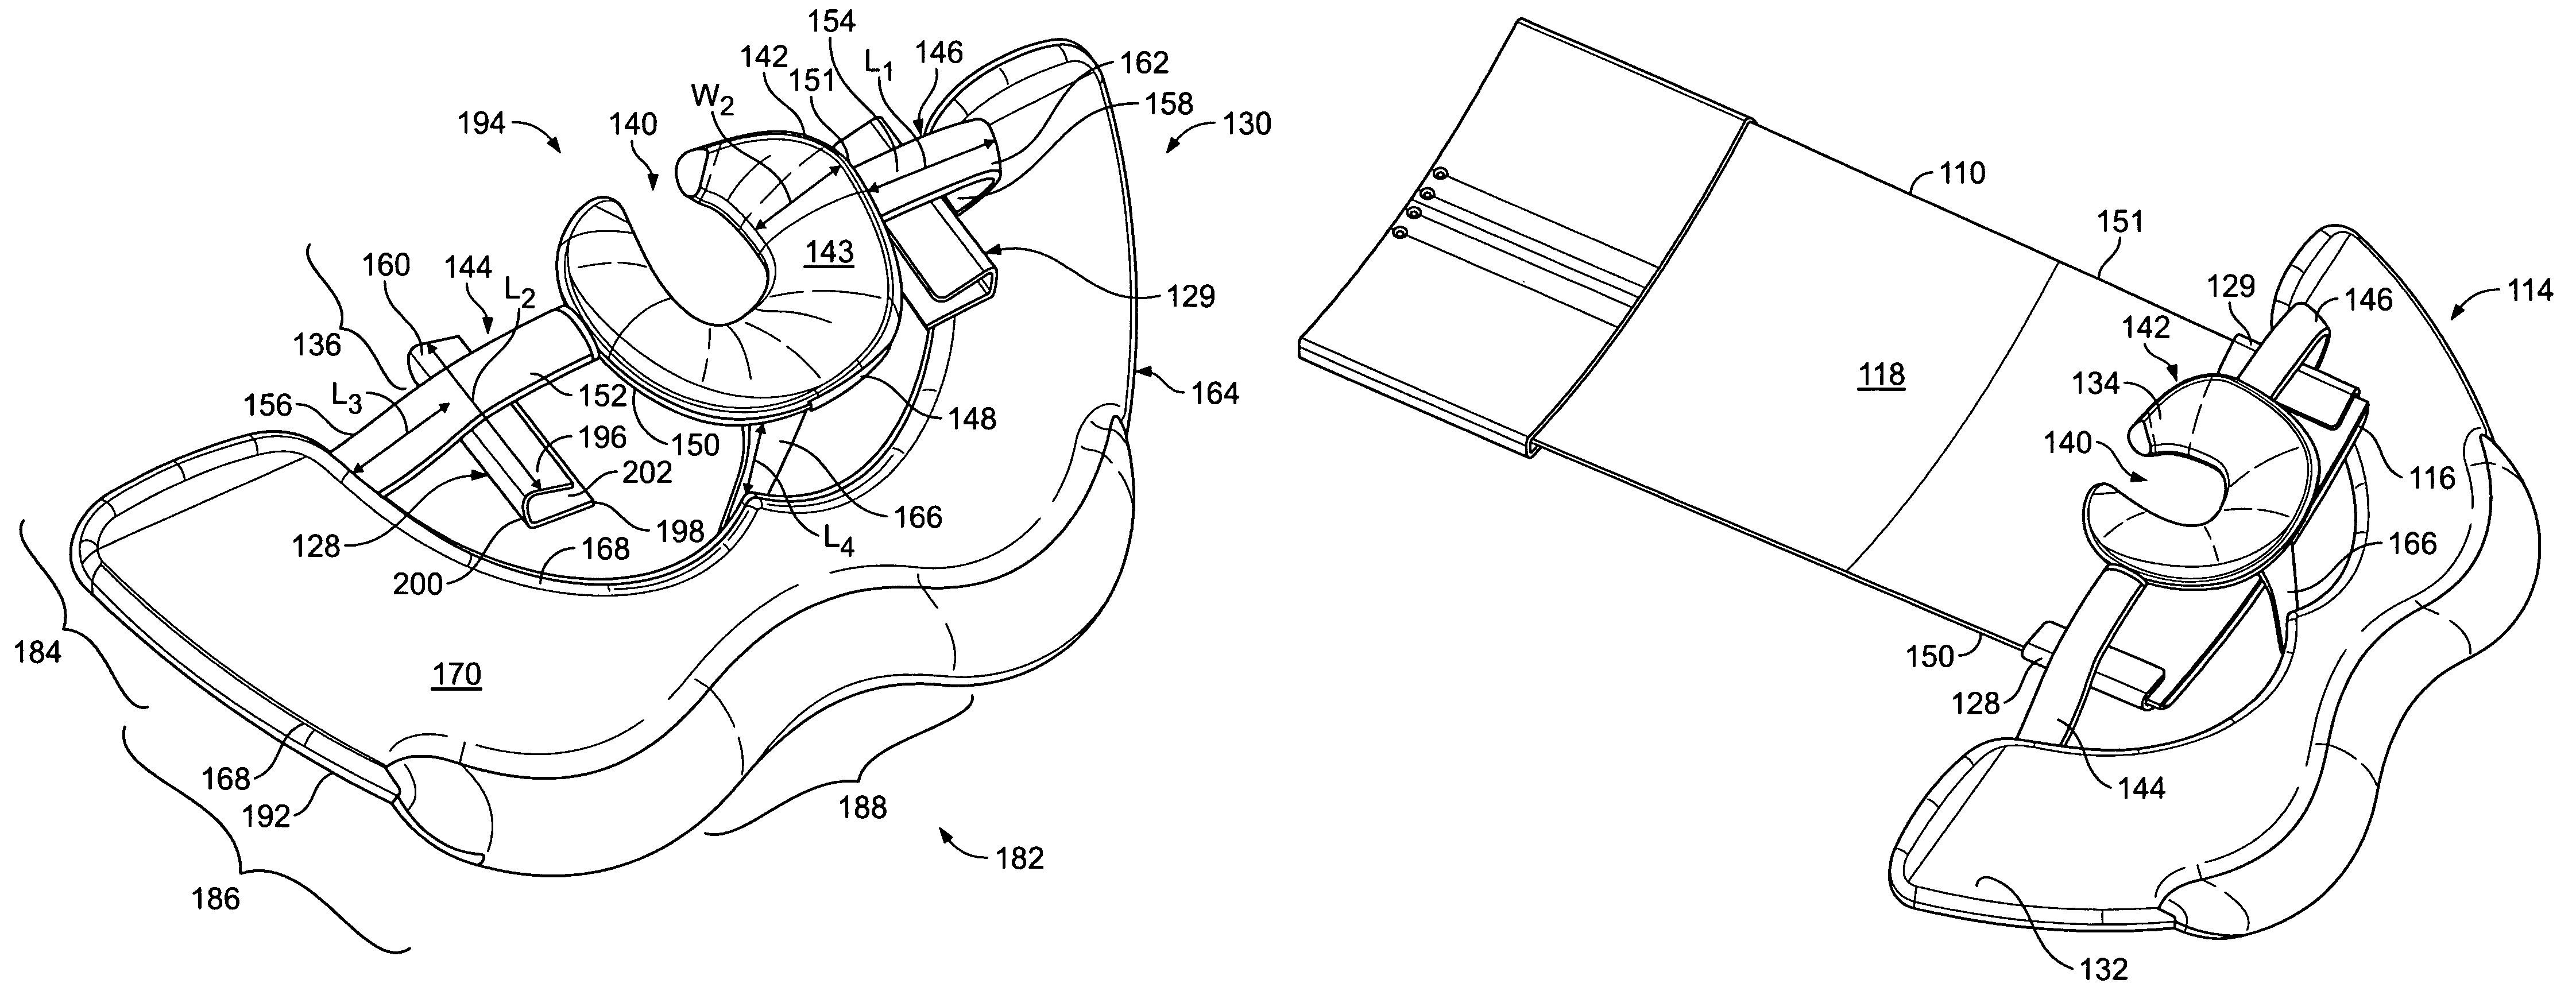 Apparatus for supporting a patient in a prone position during diagnostic imaging